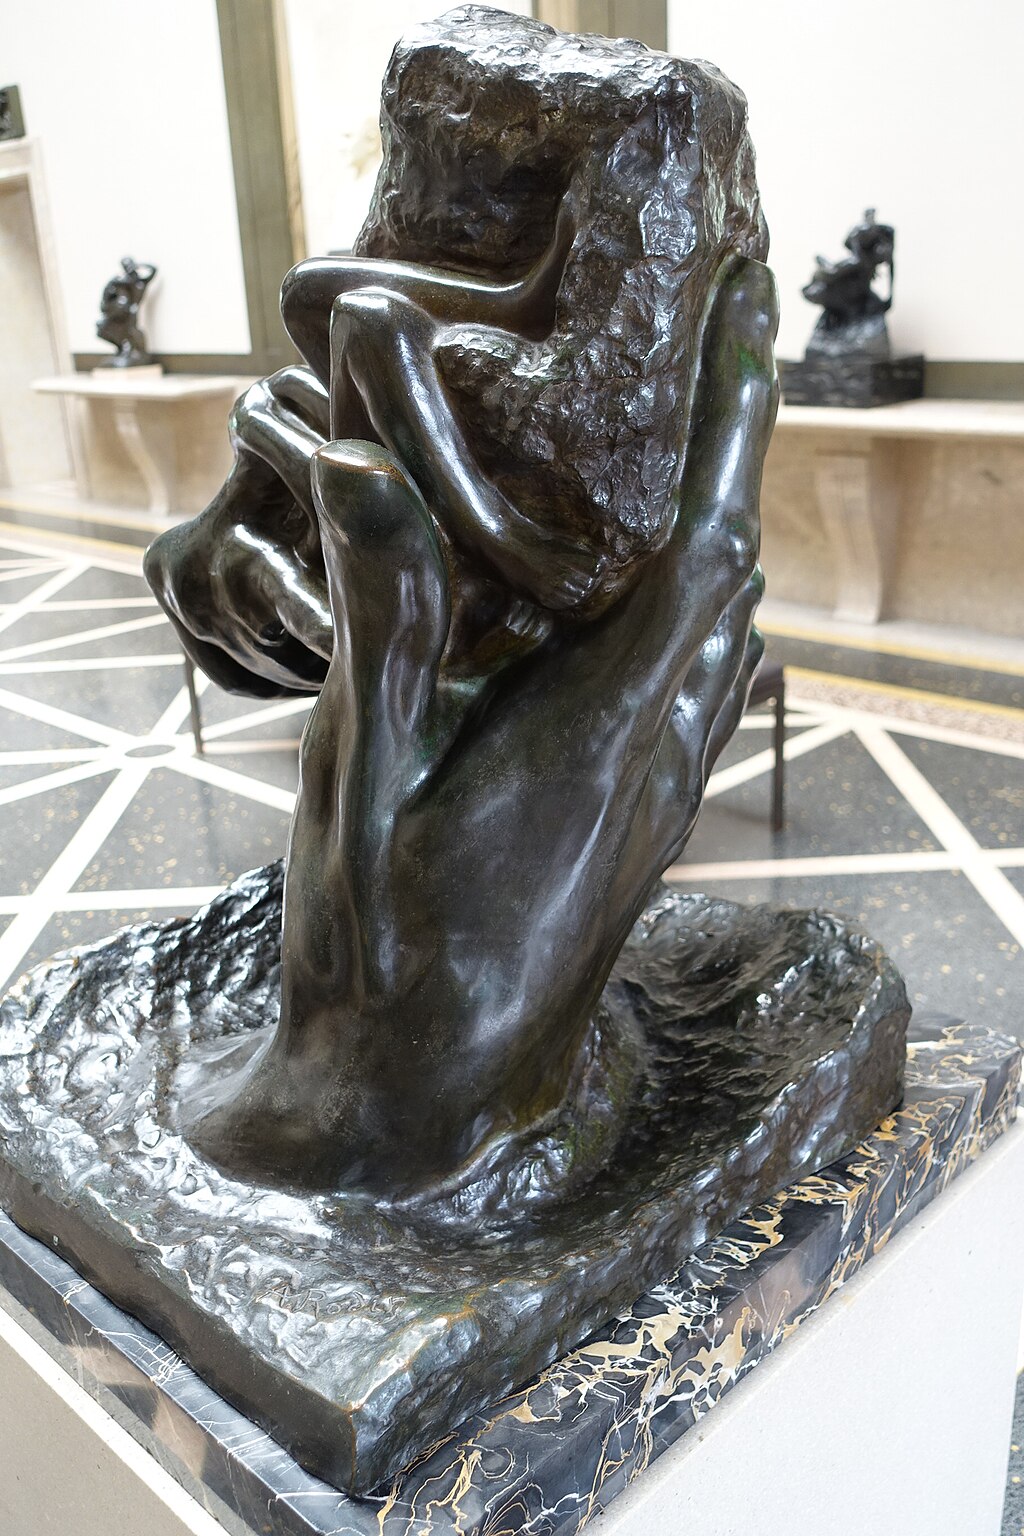 "The Hand of God" by Auguste Rodin